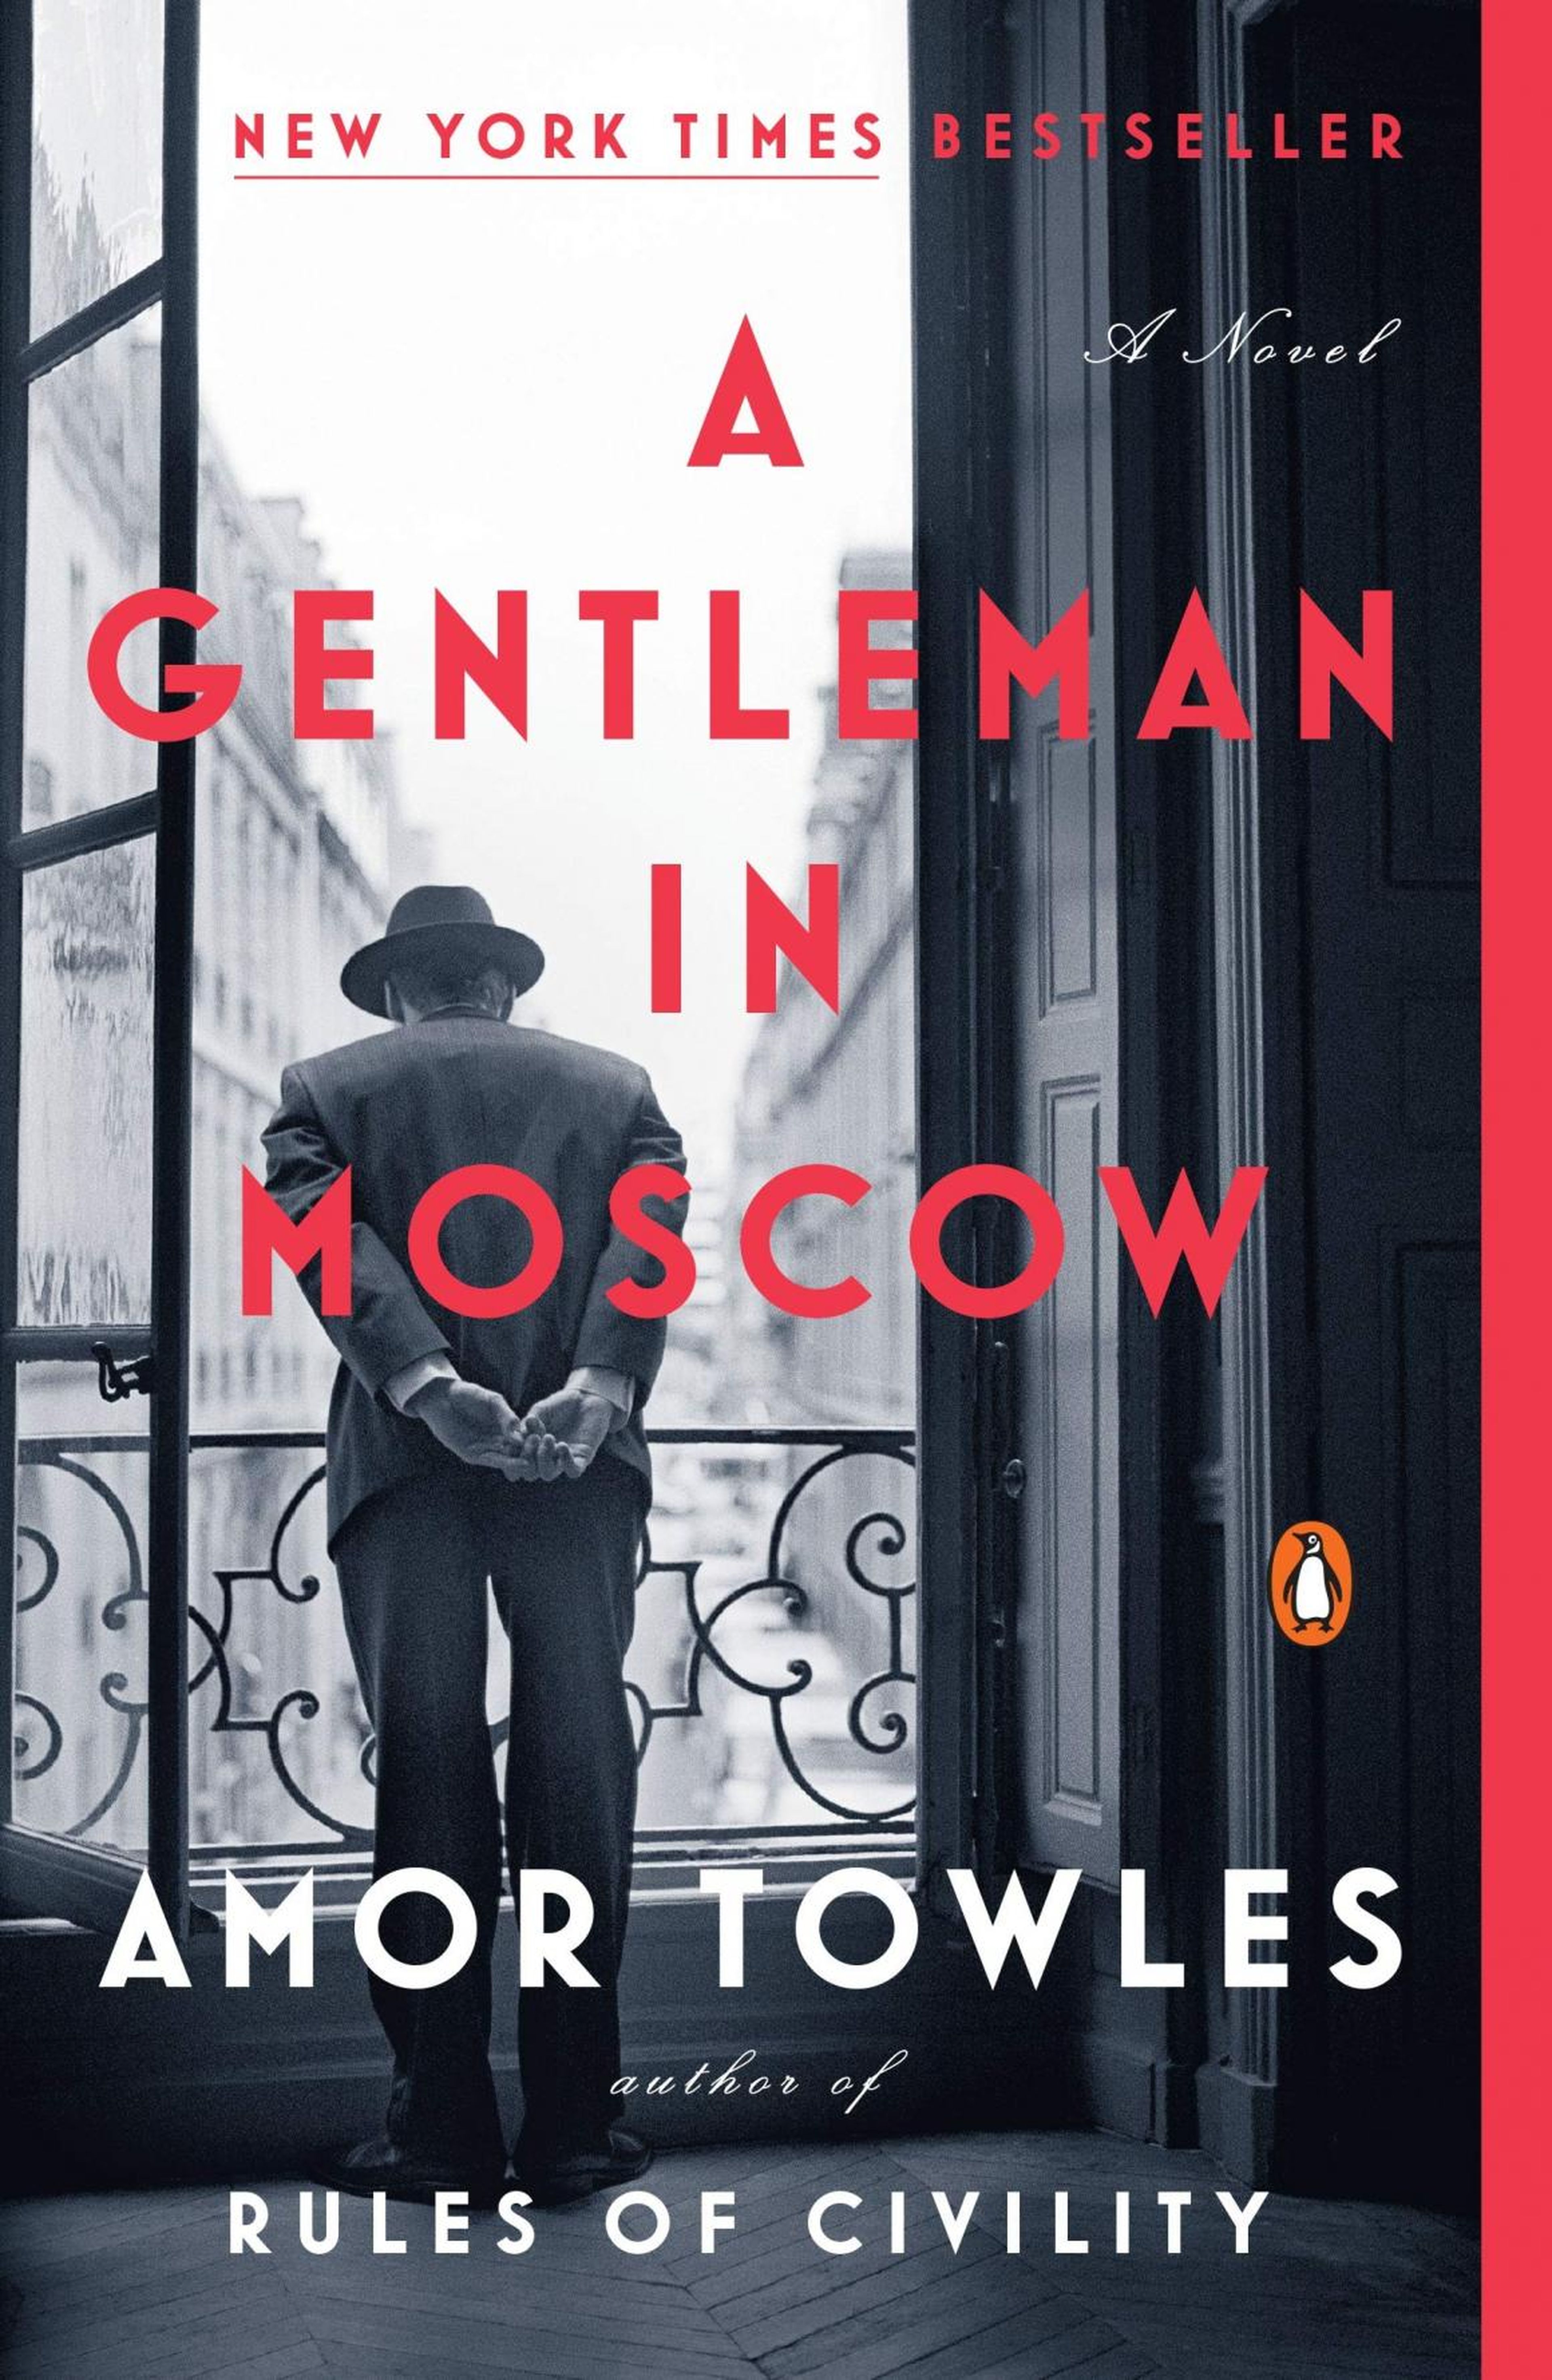 "A Gentleman in Moscow" by Amor Towles